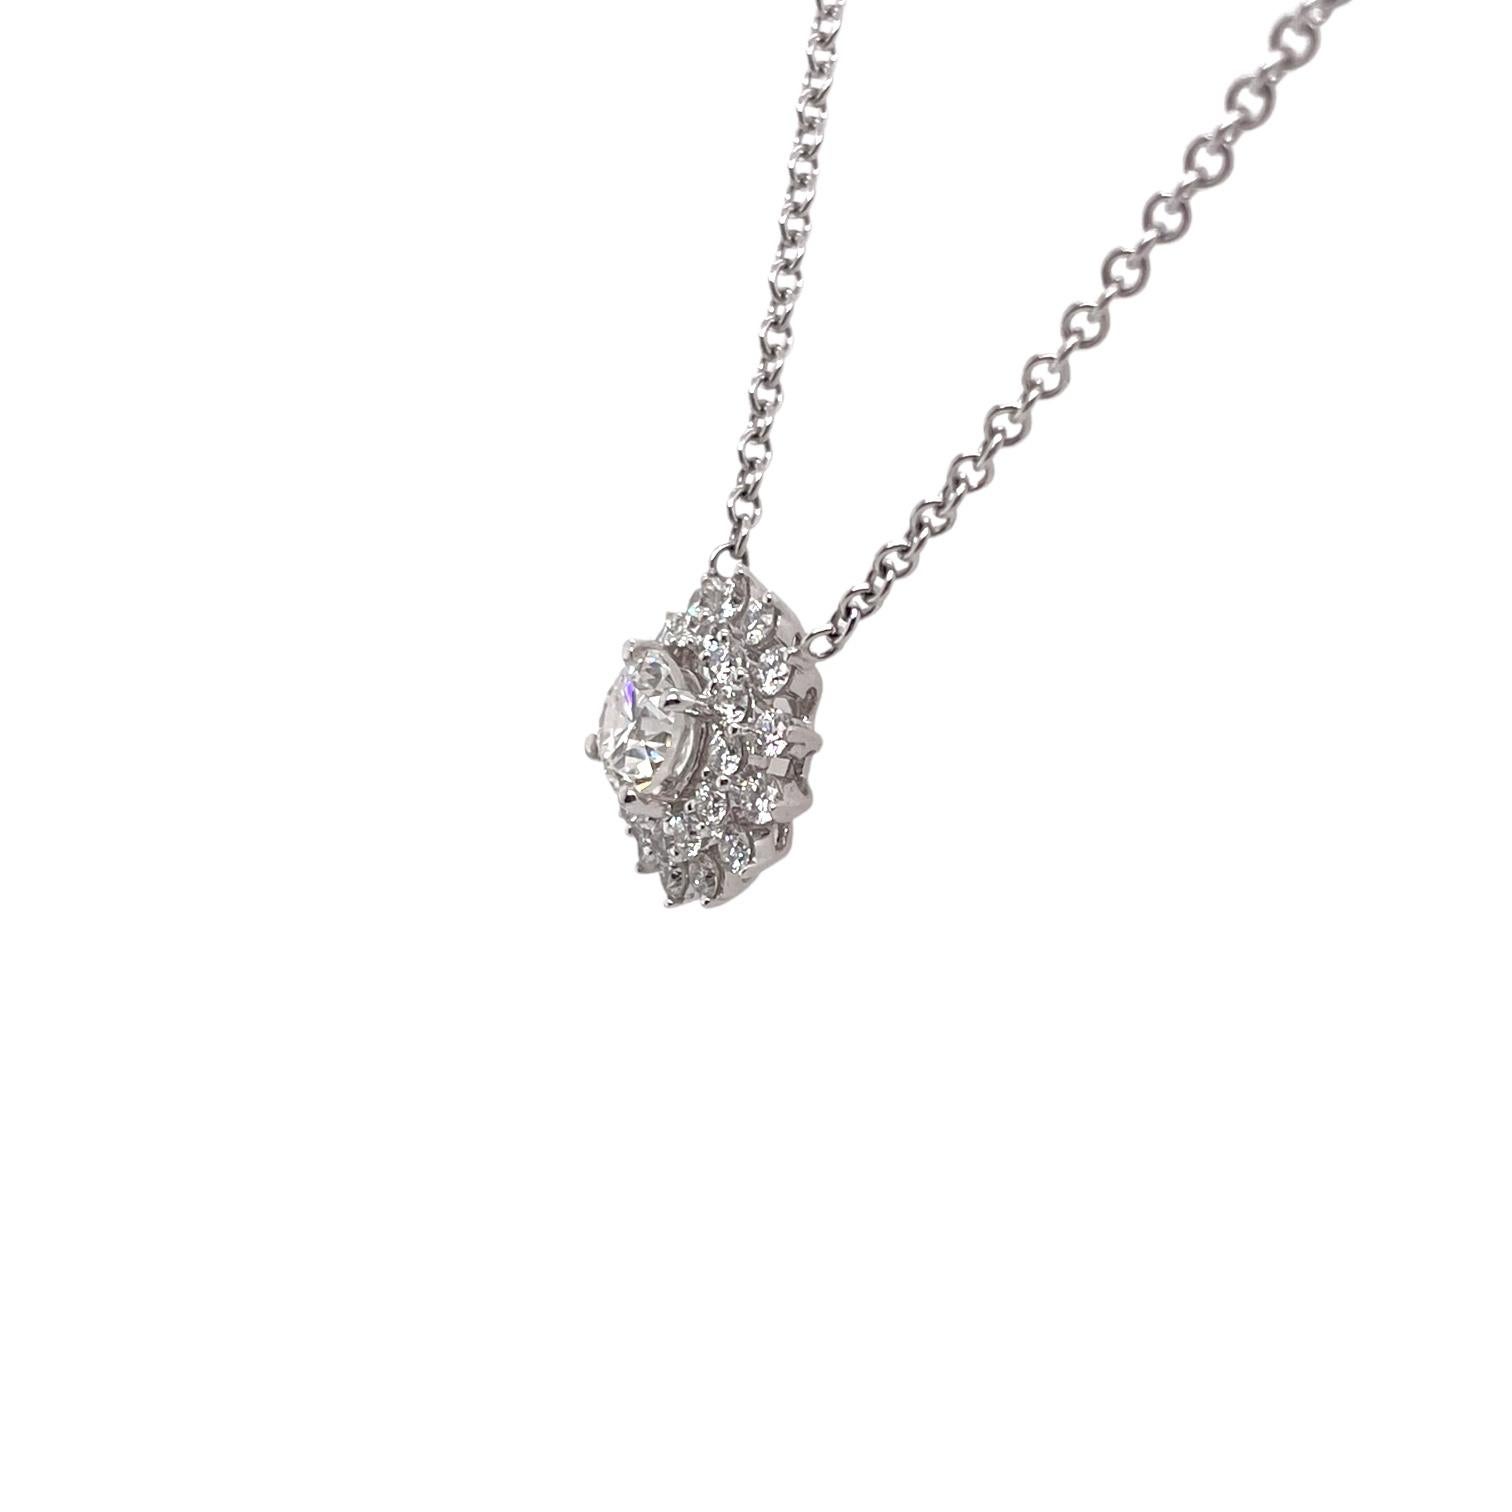 Diamond cluster pendant in 14k white gold contains 1 center round brilliant diamond, 0.70ct and round brilliant diamonds surrounding, 0.62tcw. Center diamond is H in color and VS2 in clarity. Side diamonds are near colorless and VS in clarity,